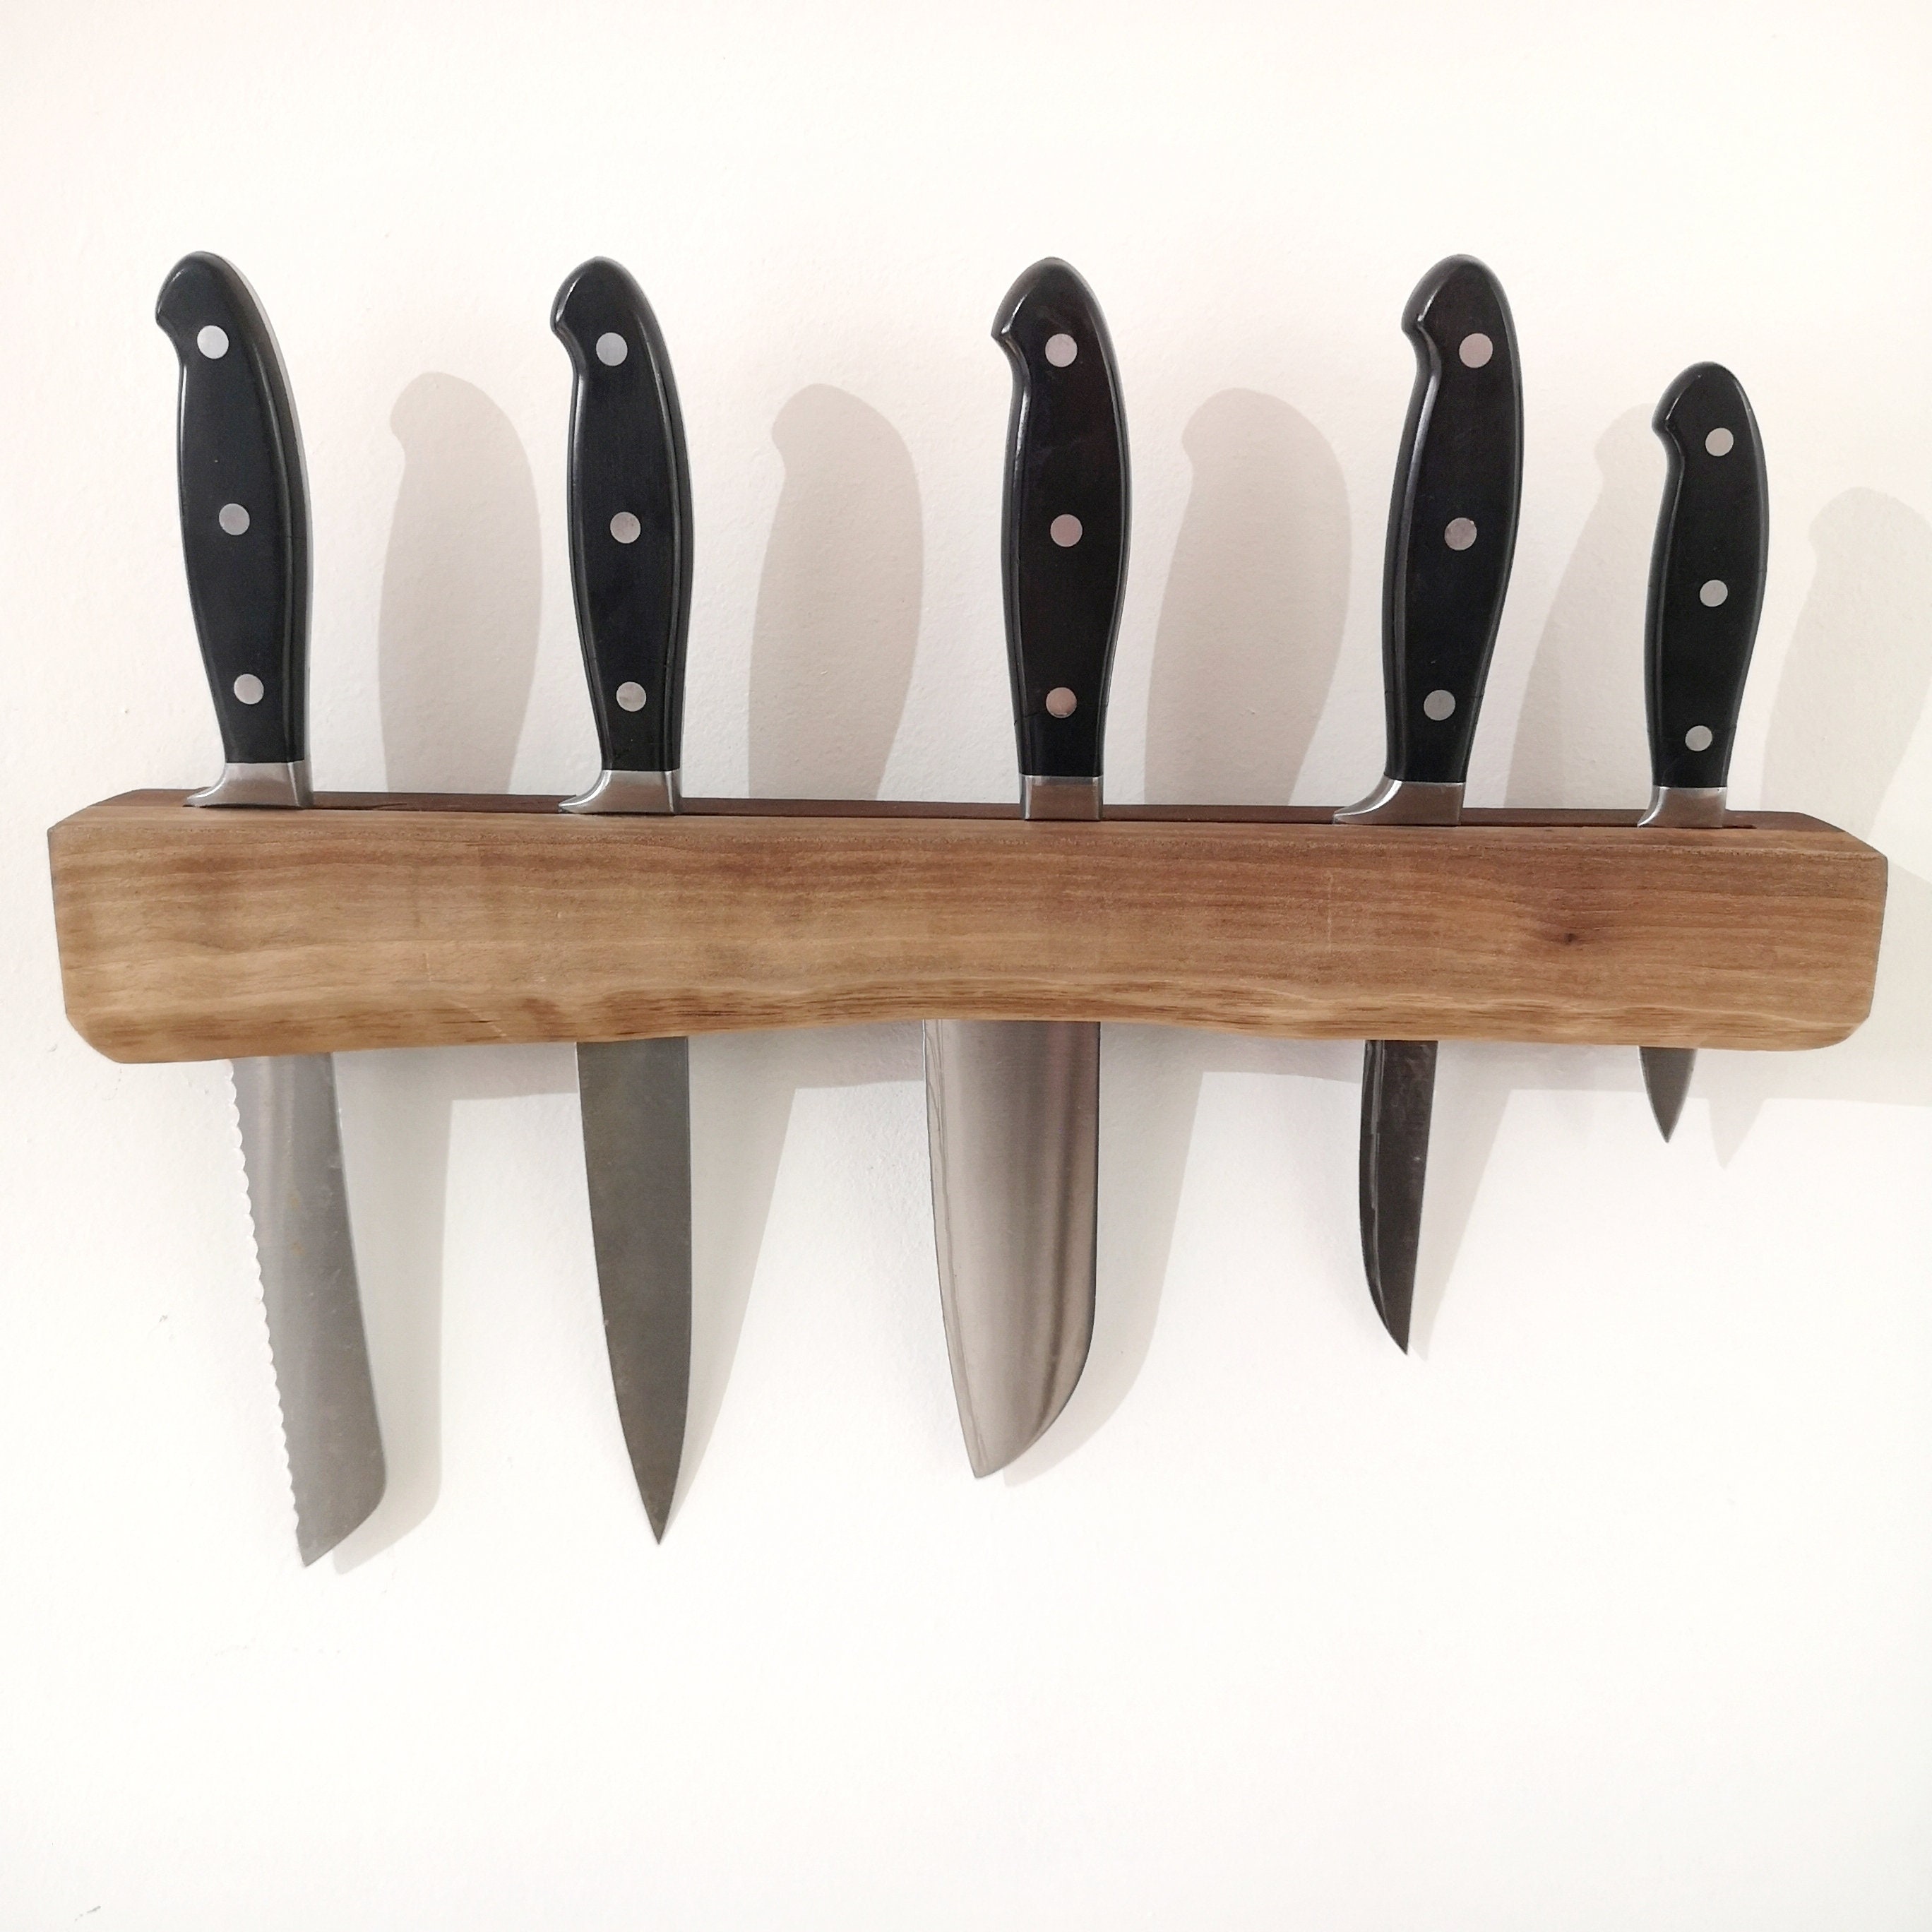 Kitchen Knife Holder, Wood Knife Rack, Wall Knife Holder, Wall Knife Block,  Gift for Him, Personalized Gift, Kitchen Storage 